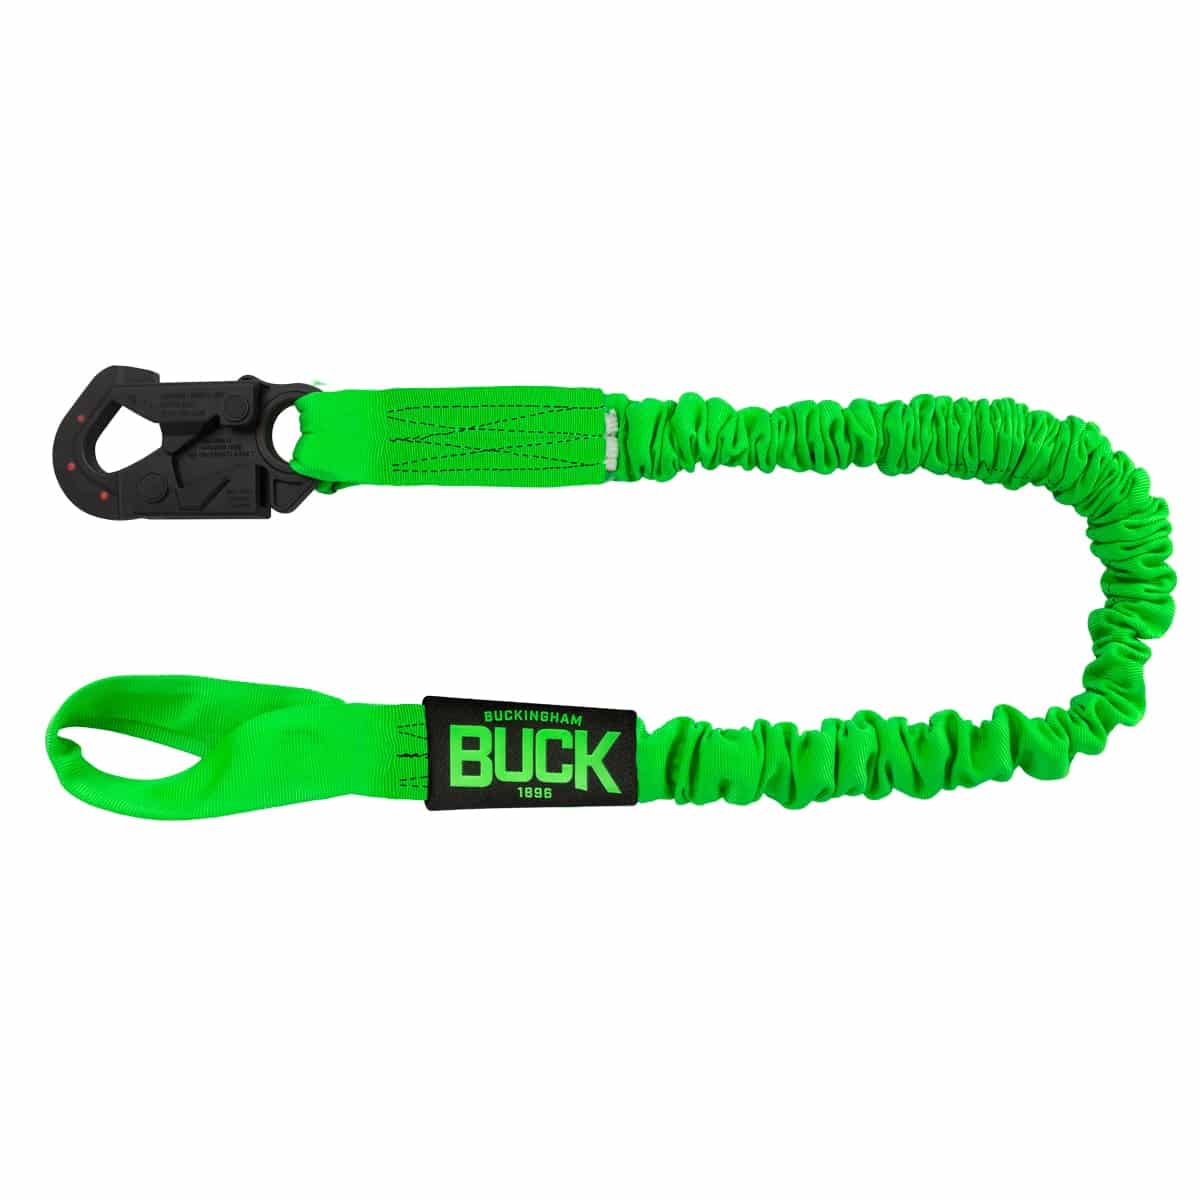 2-in-1 Snap & Snap Chainsaw Lanyard